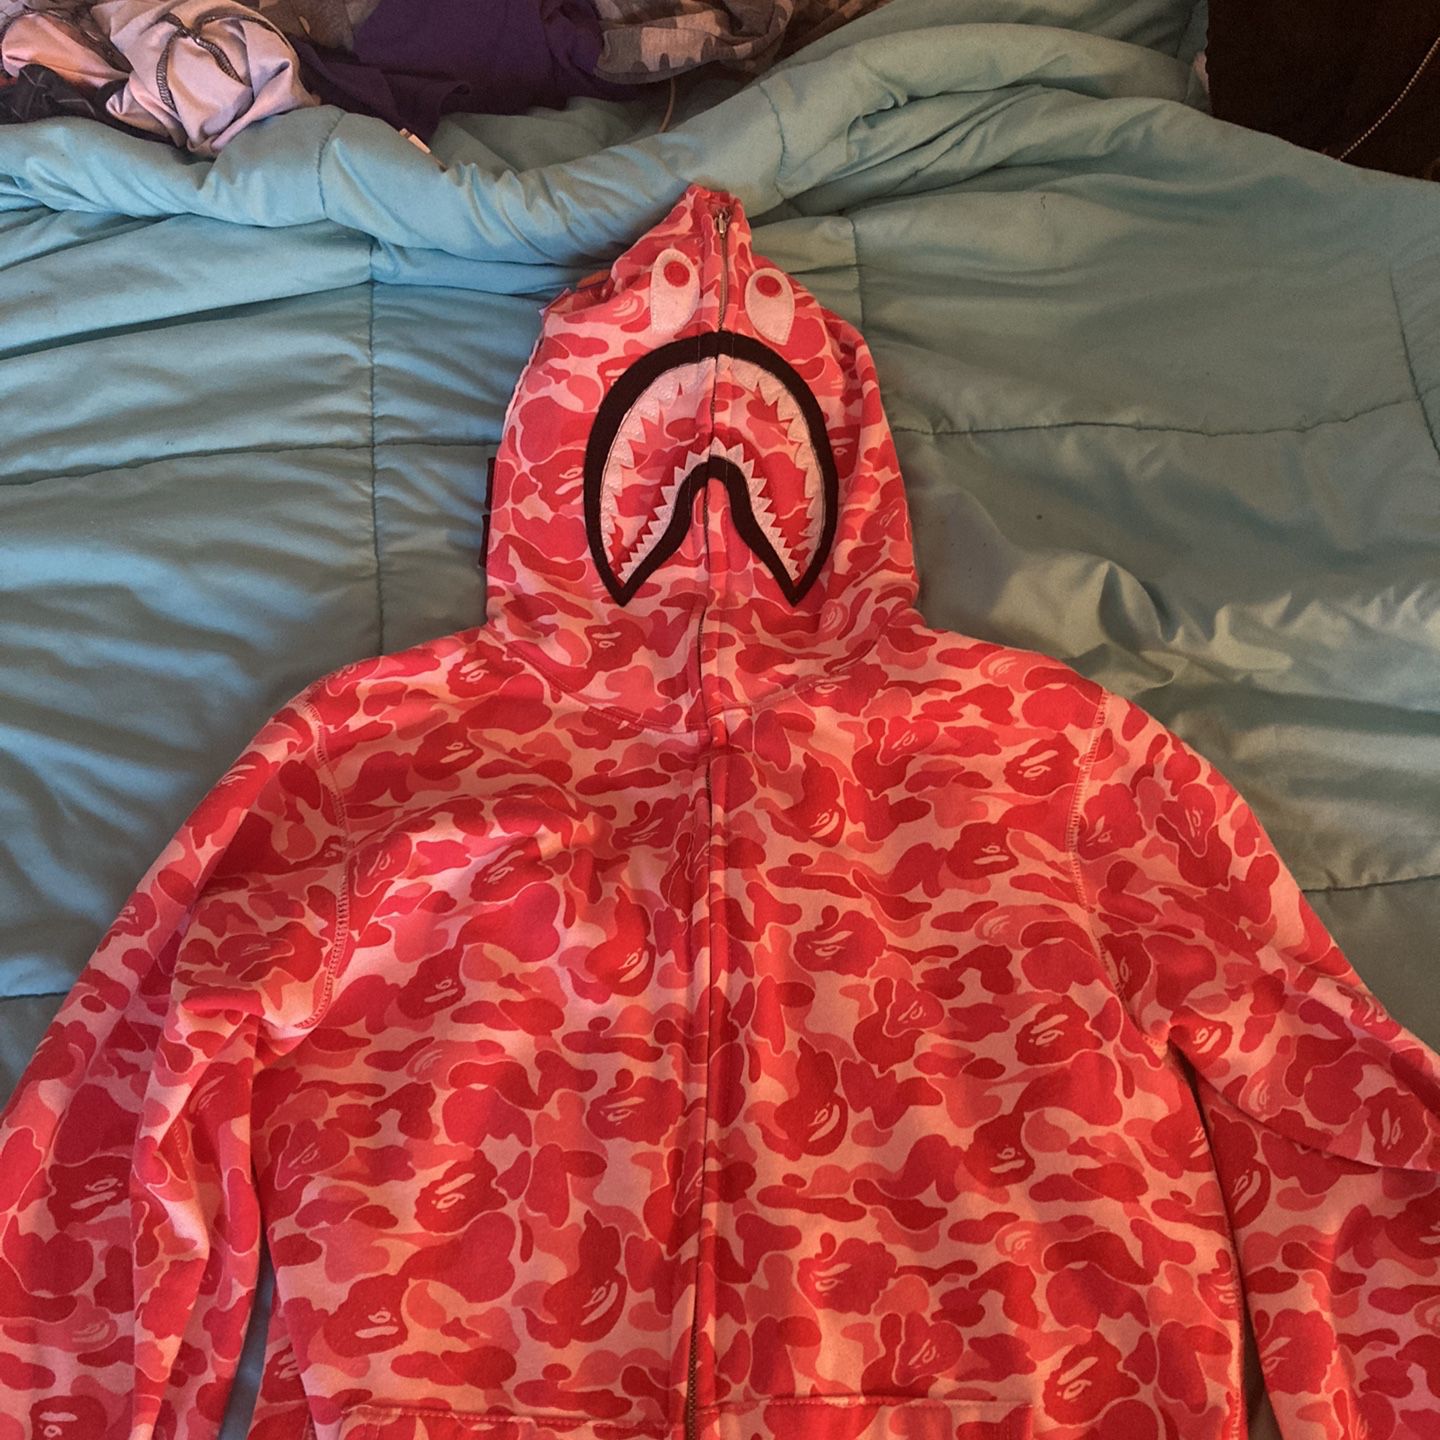 A Bathing Ape Bedding for Sale